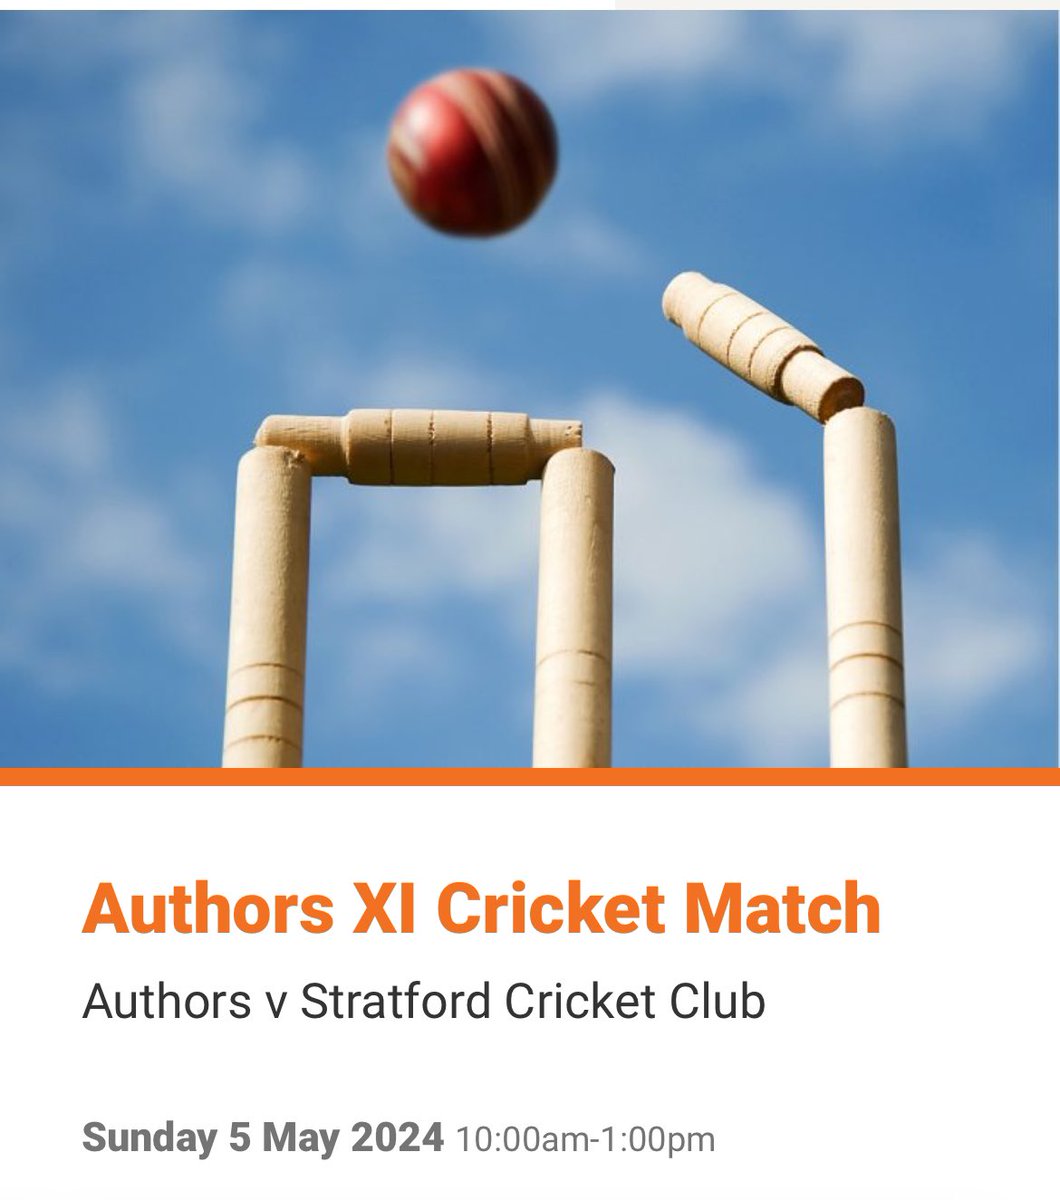 The sun is shining this morning for the @AuthorsCC match against @StratfordCric this morning. Come and cheer on @peterfrankopan @anthony_mcgowan @AdamRutherford et al!